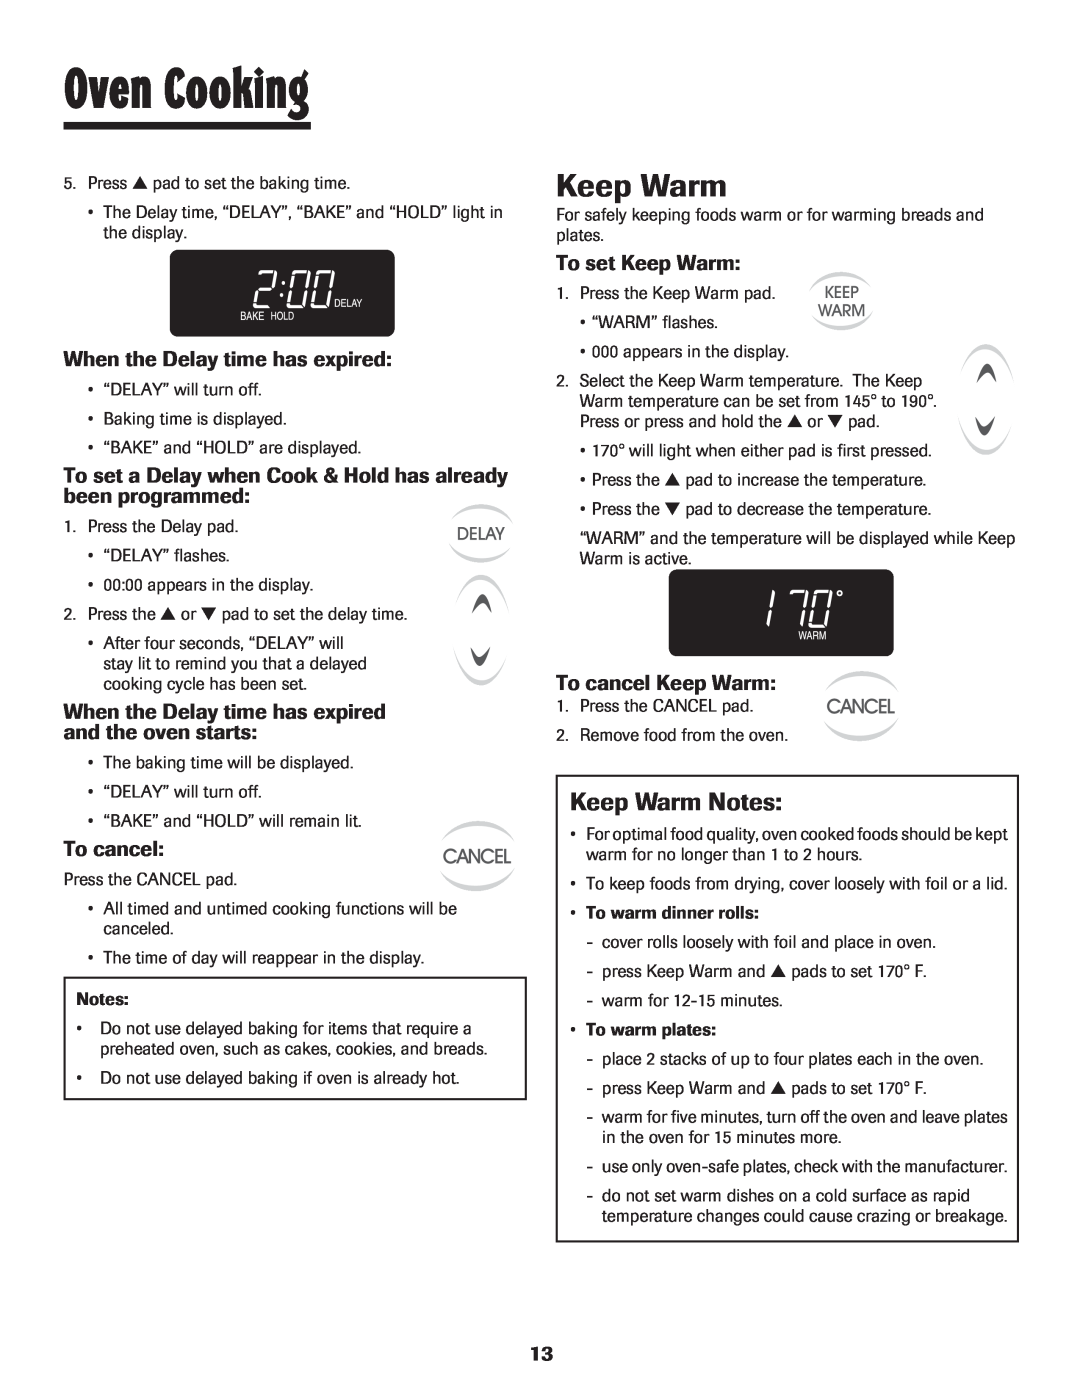 Maytag Keep Warm Notes, When the Delay time has expired, To set Keep Warm, To cancel Keep Warm, Oven Cooking 